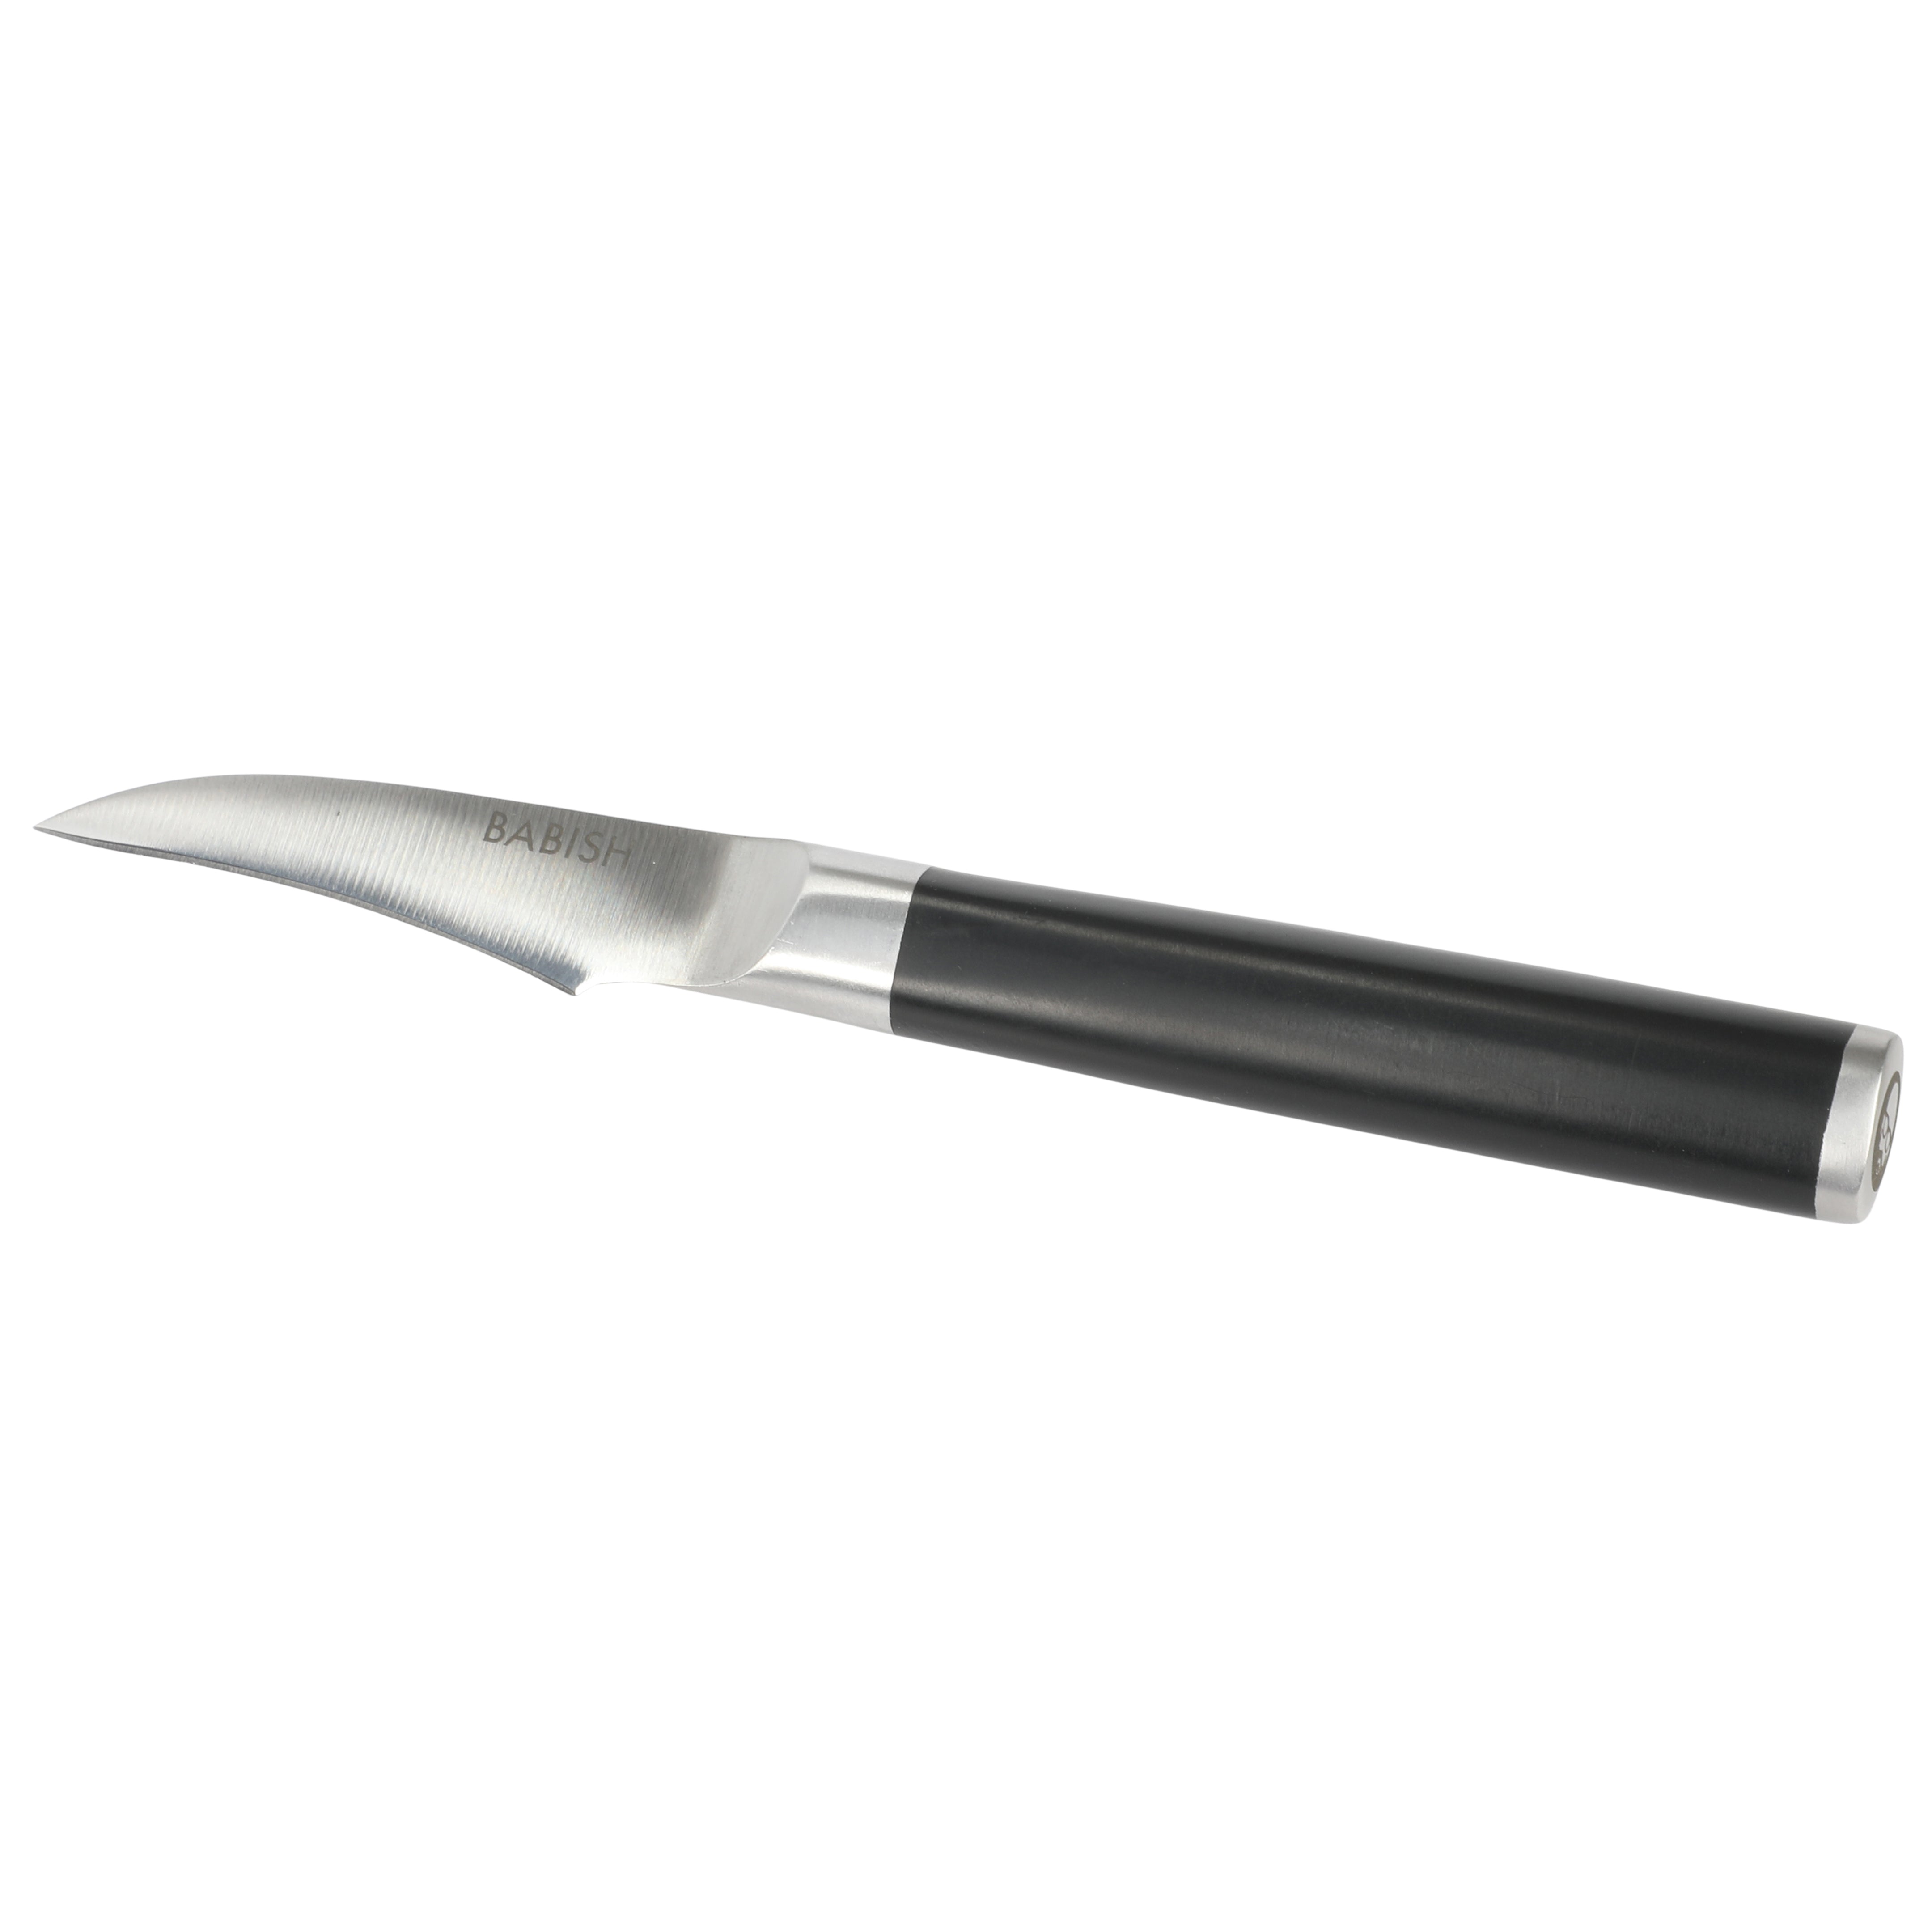 Babish High-Carbon 1.4116 German Steel Cutlery, 7.5 Clef (Cleaver + Chef)  Kn